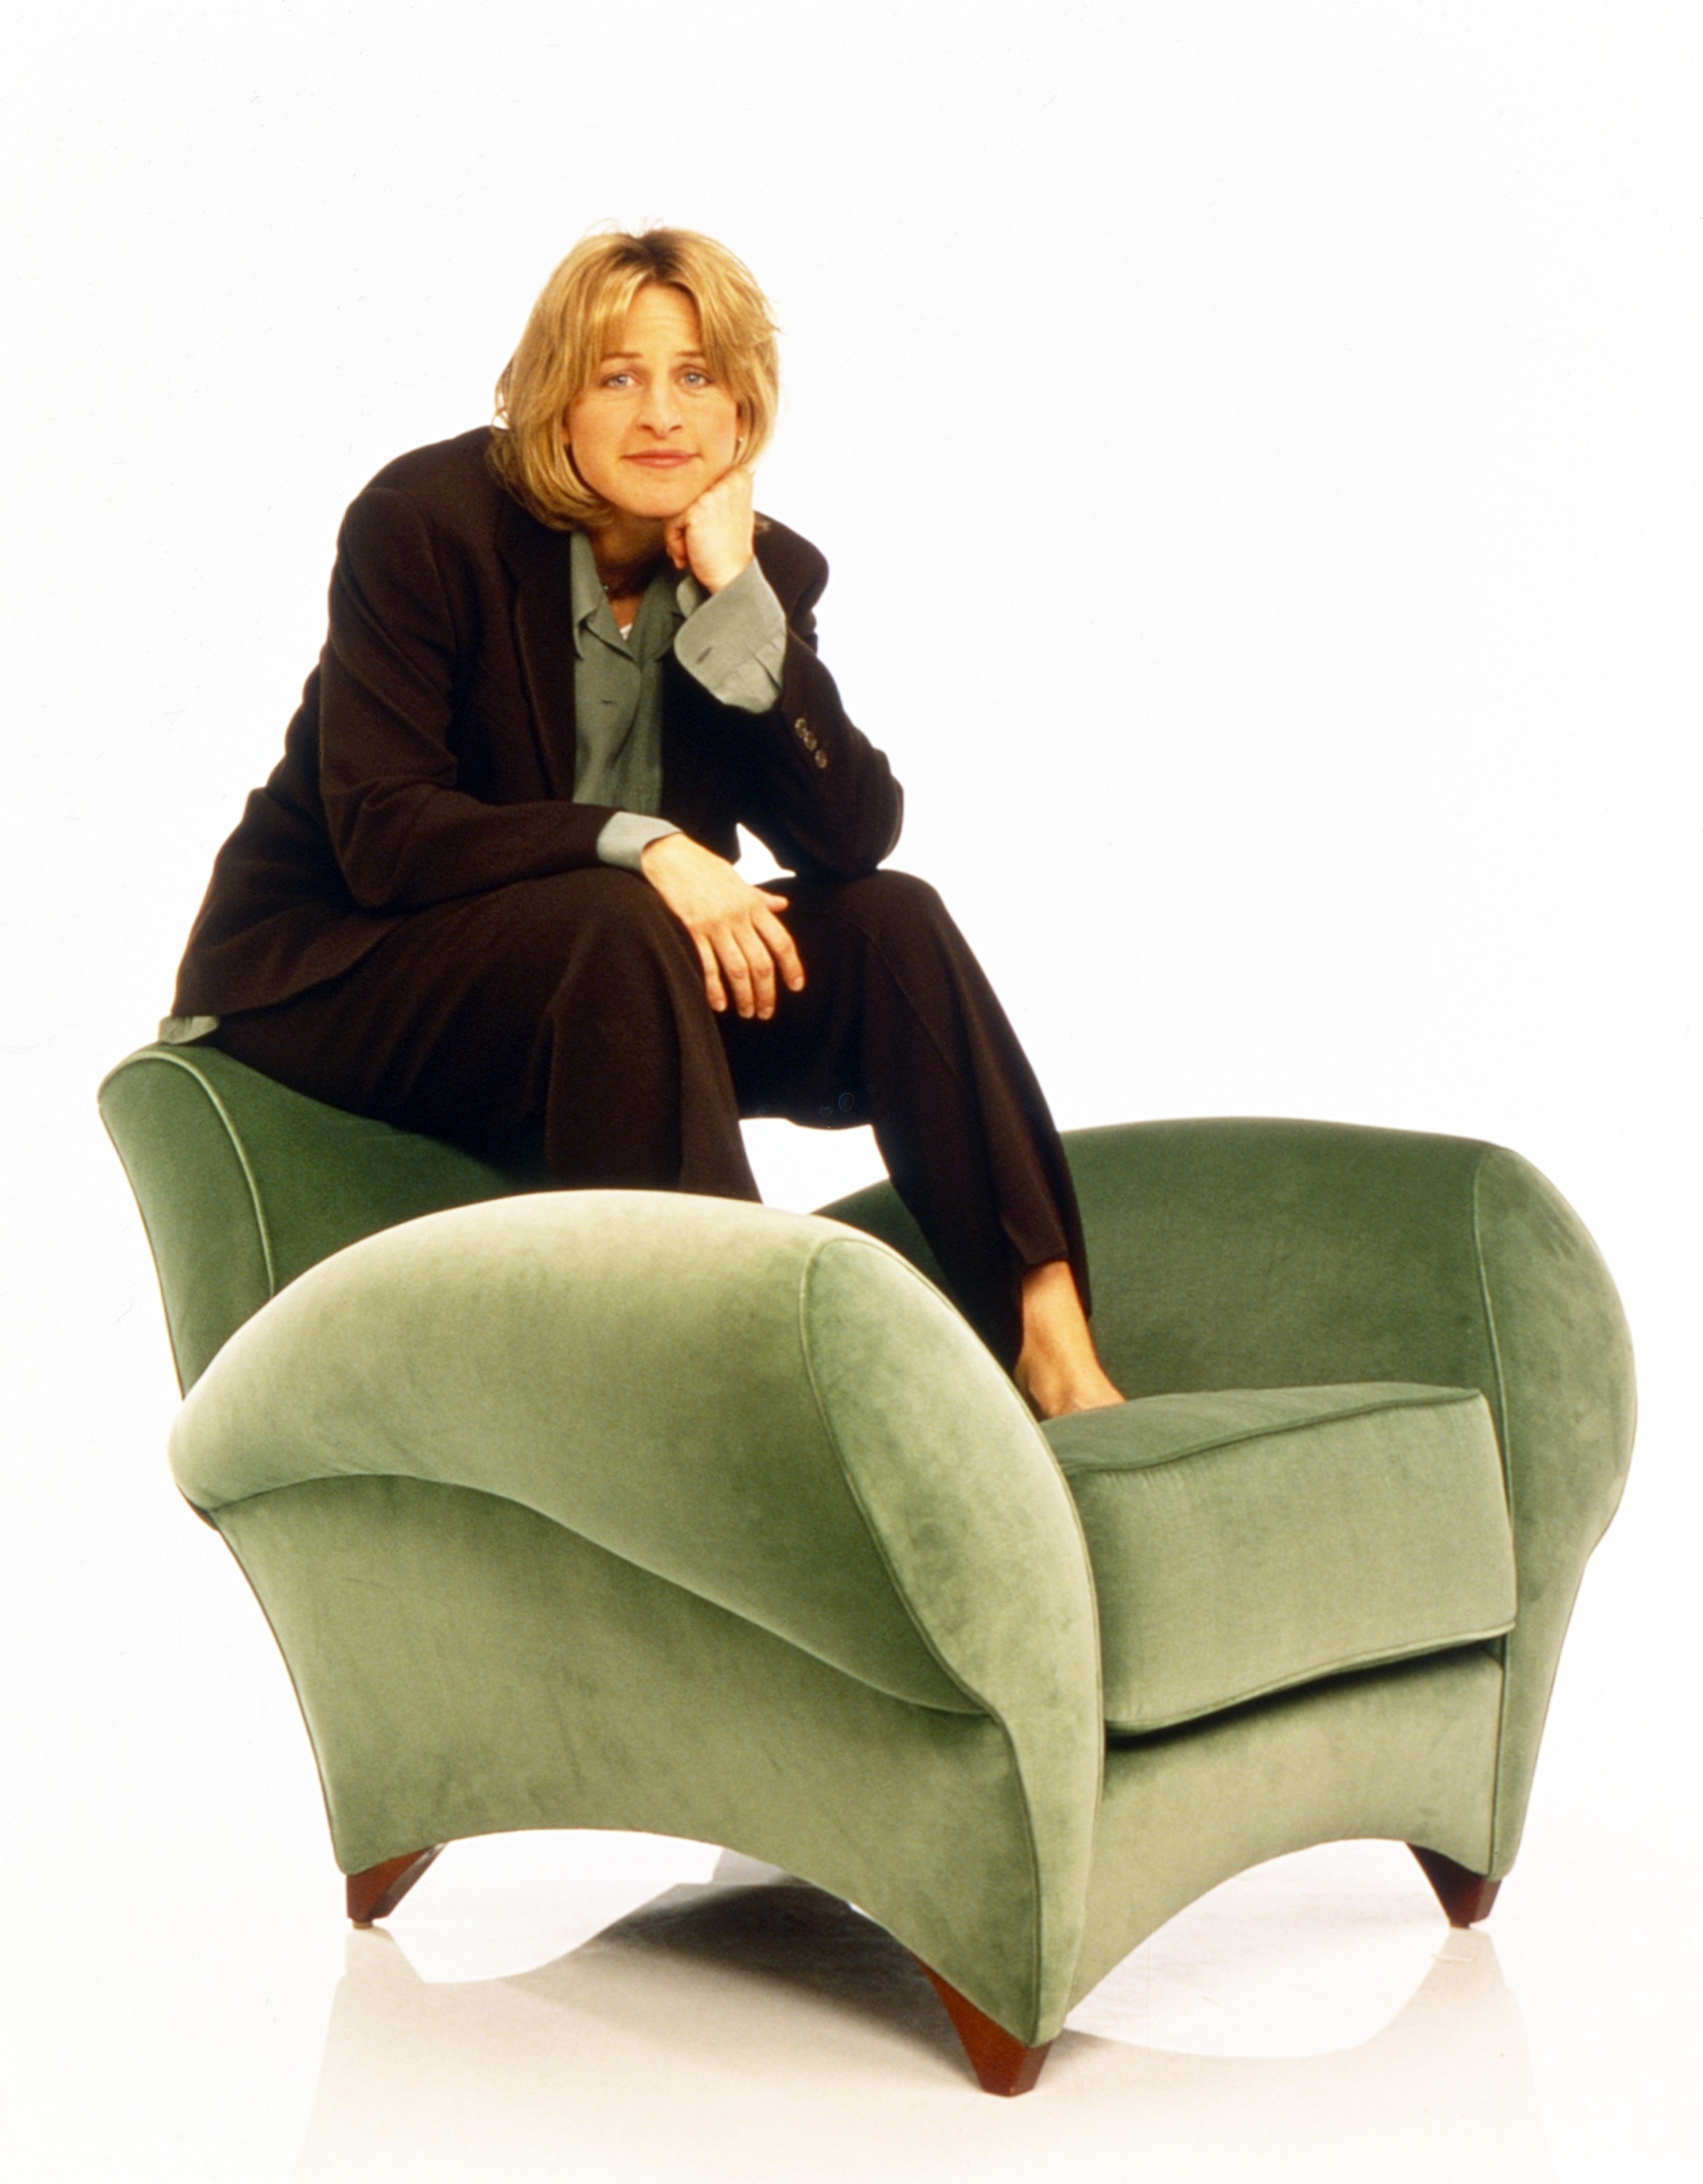 Ellen sitting on a couch in a press photo for the show